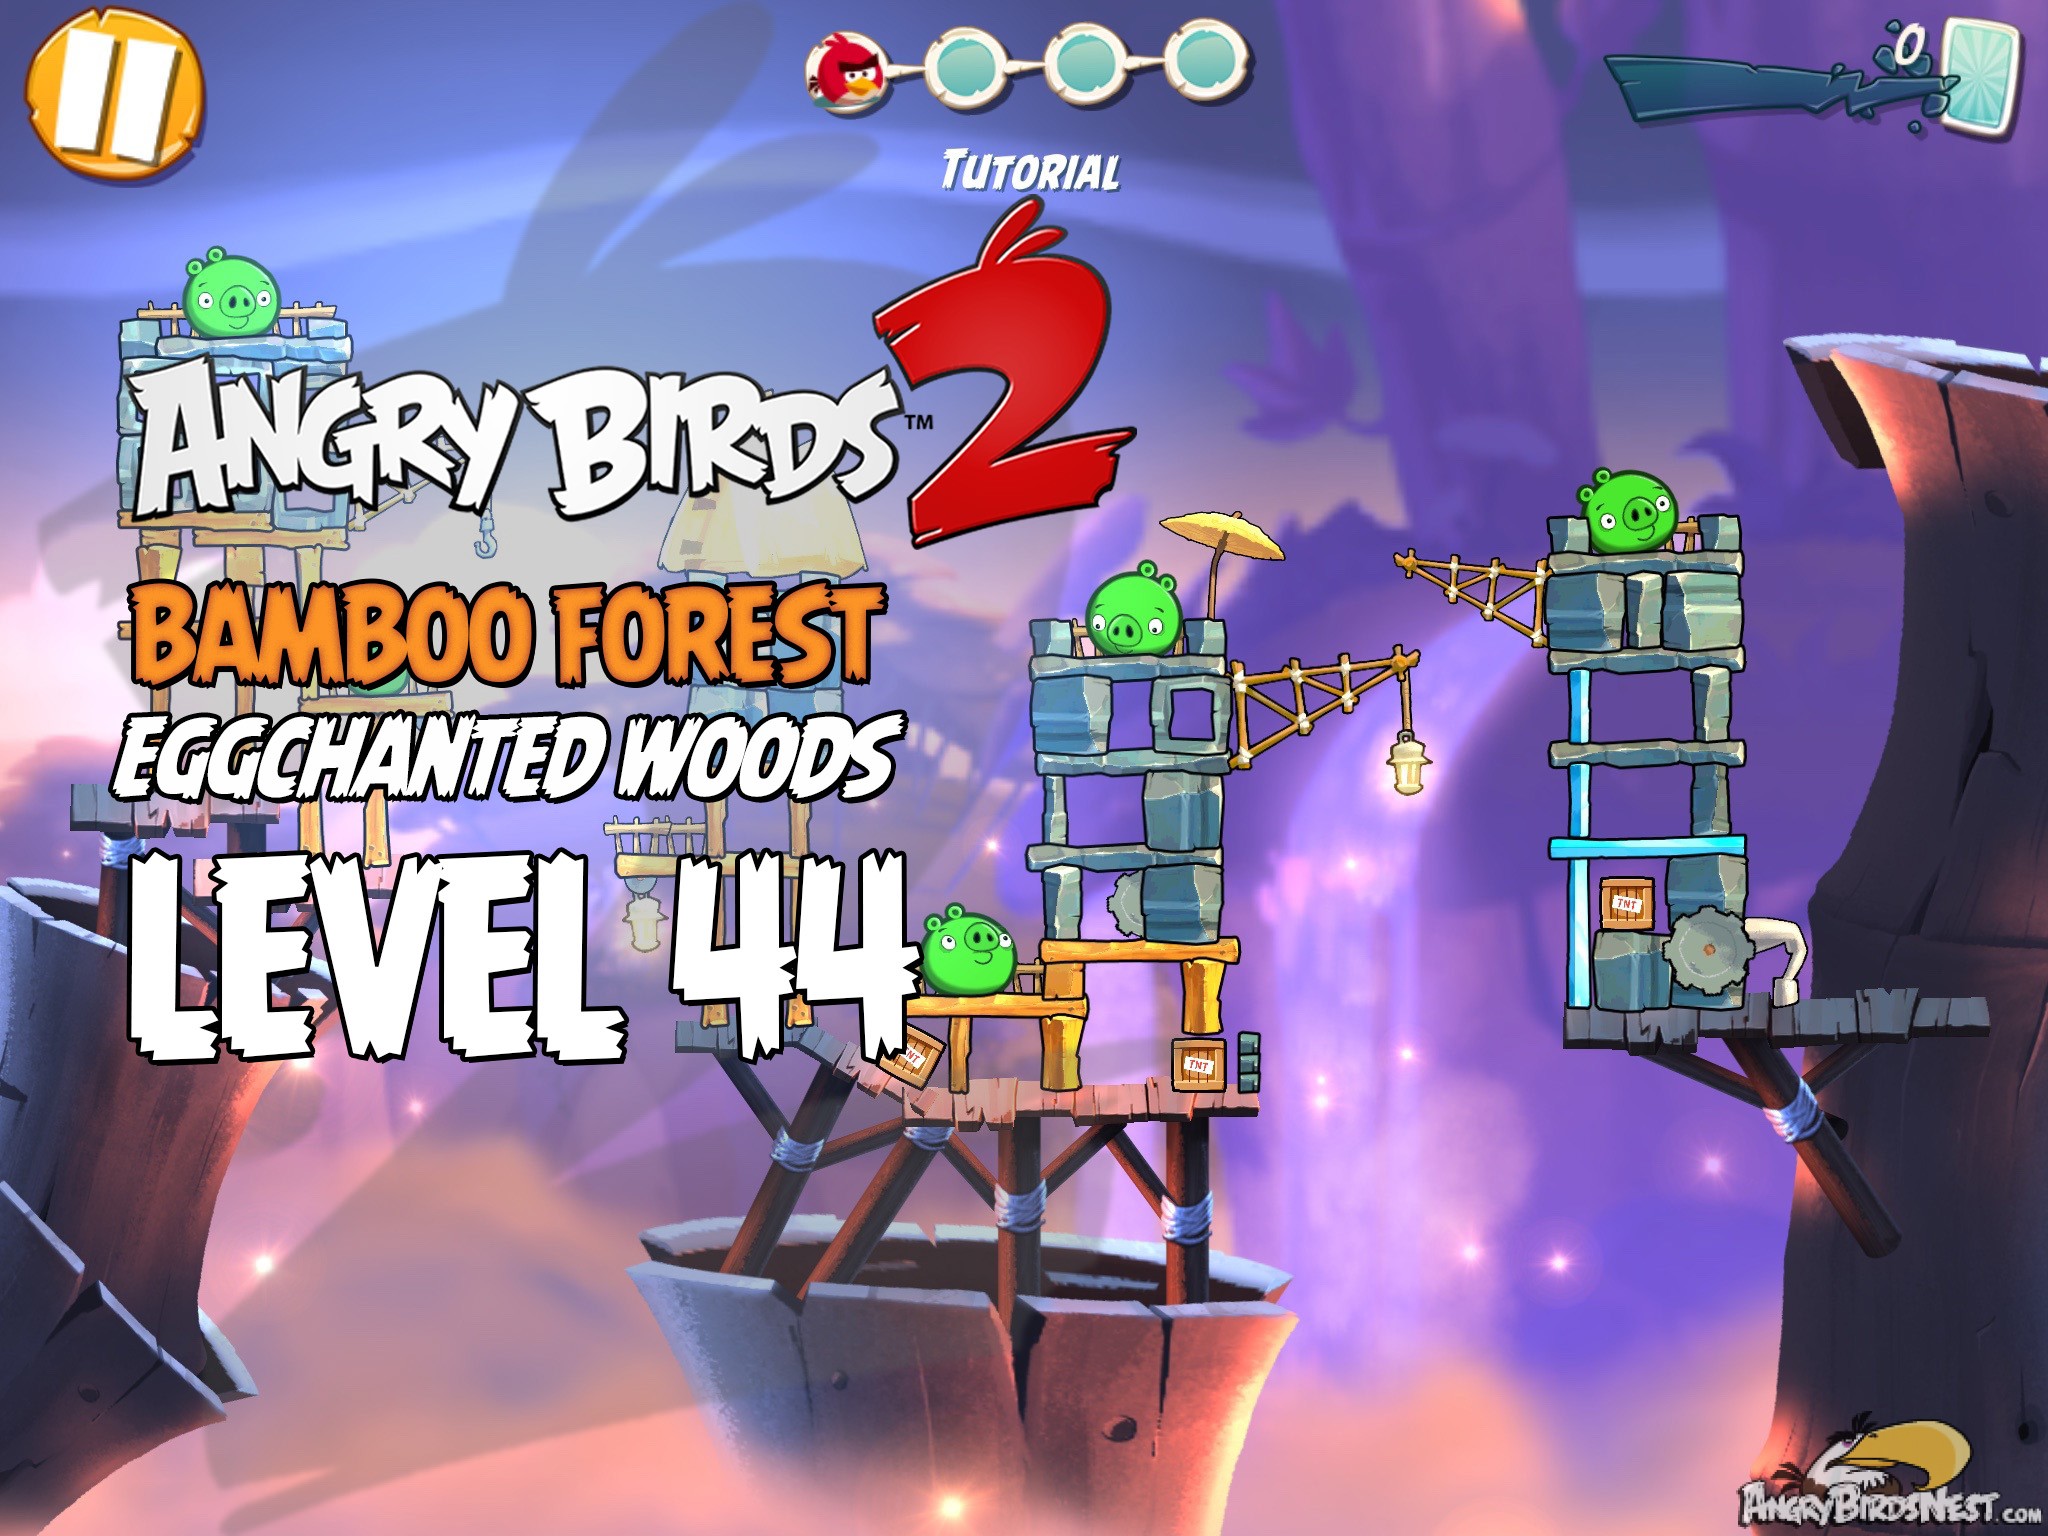 Angry Birds 2 Bamboo Forest Eggchanted Woods Level 44